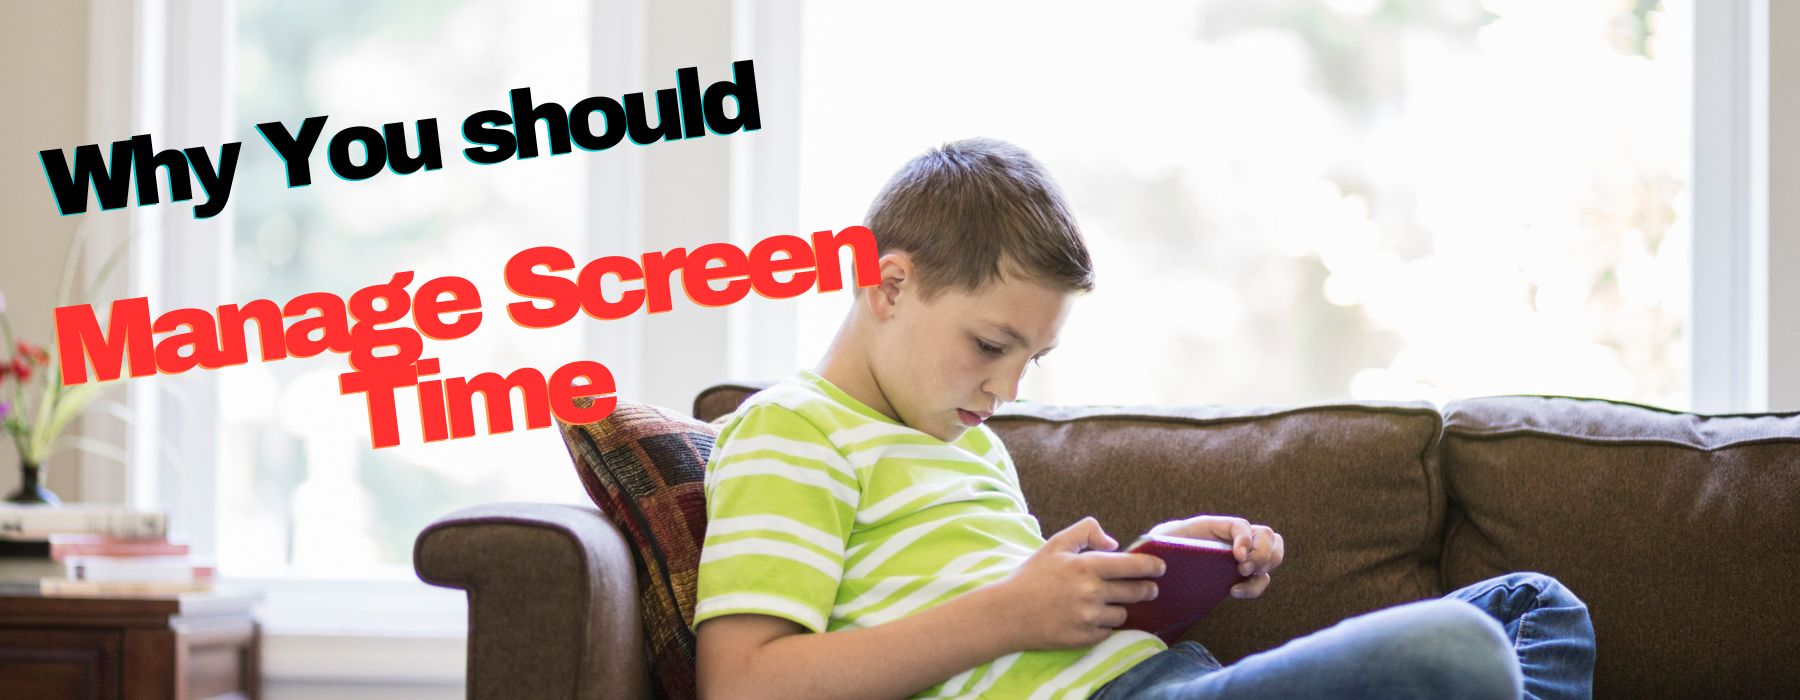 Why Manage Screen Time